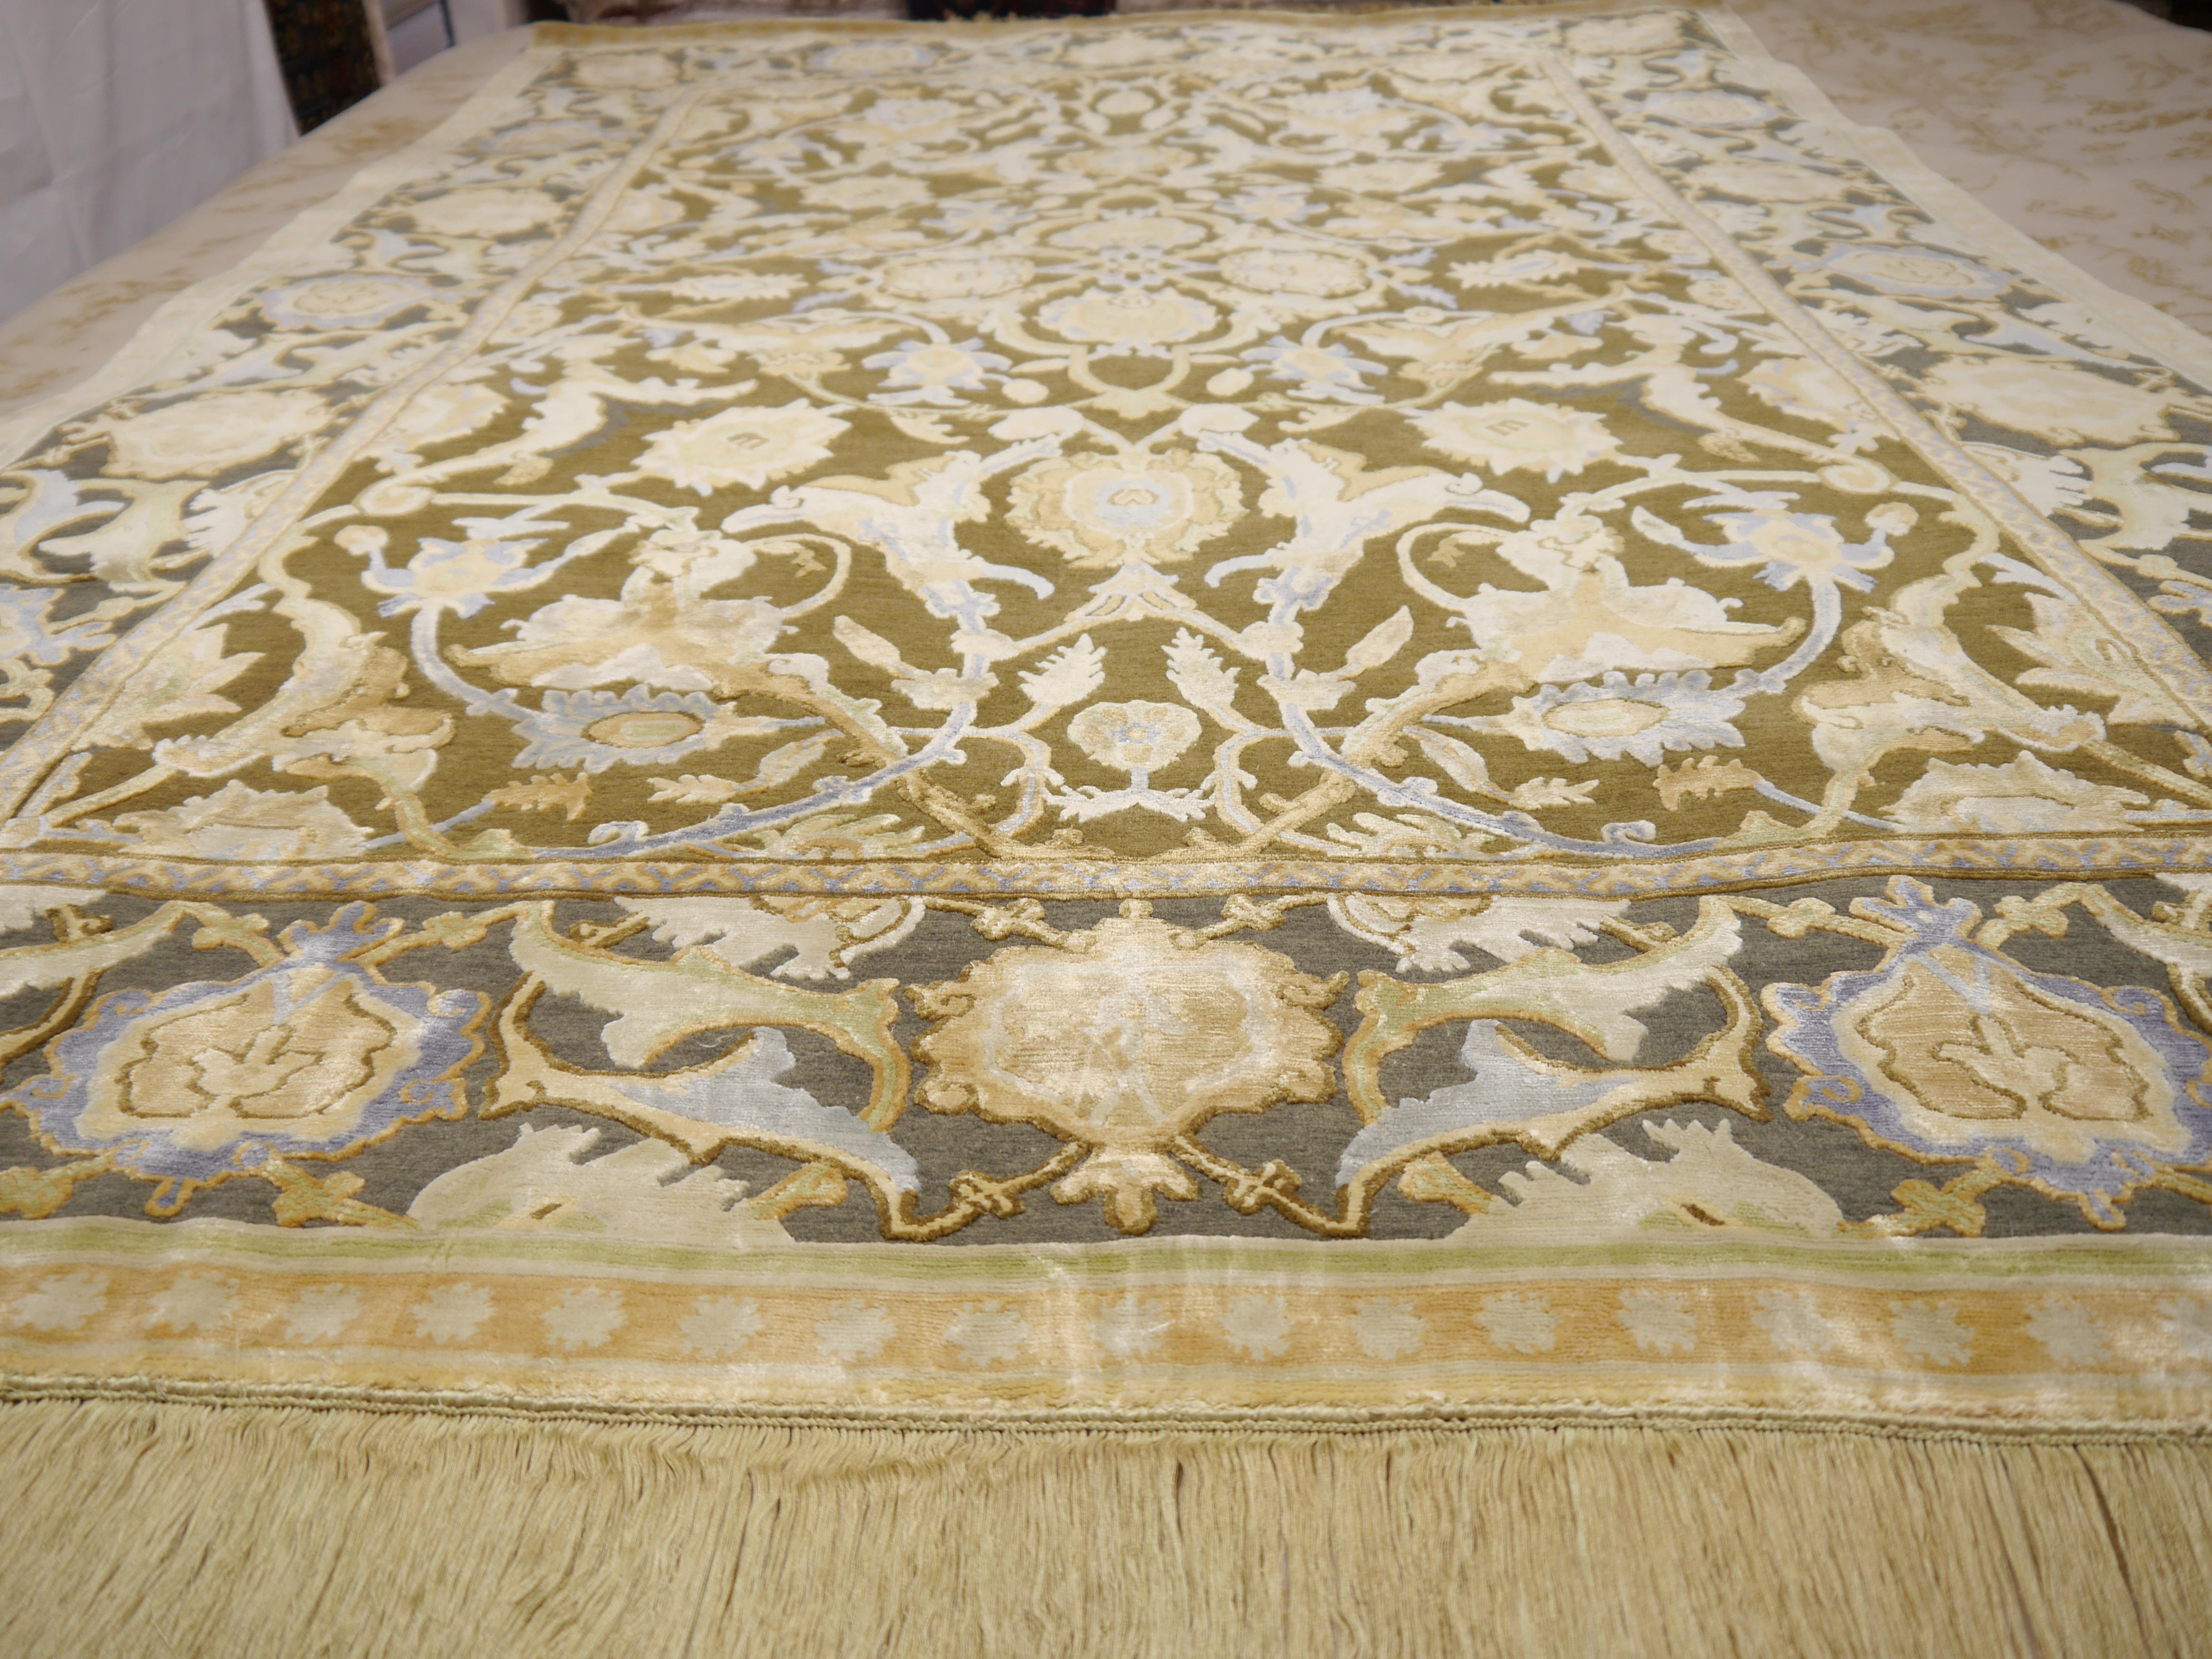 Hand-Knotted New Polonaise Rug Silk and Wool Antique Isfahan Design Bespoke Sizes